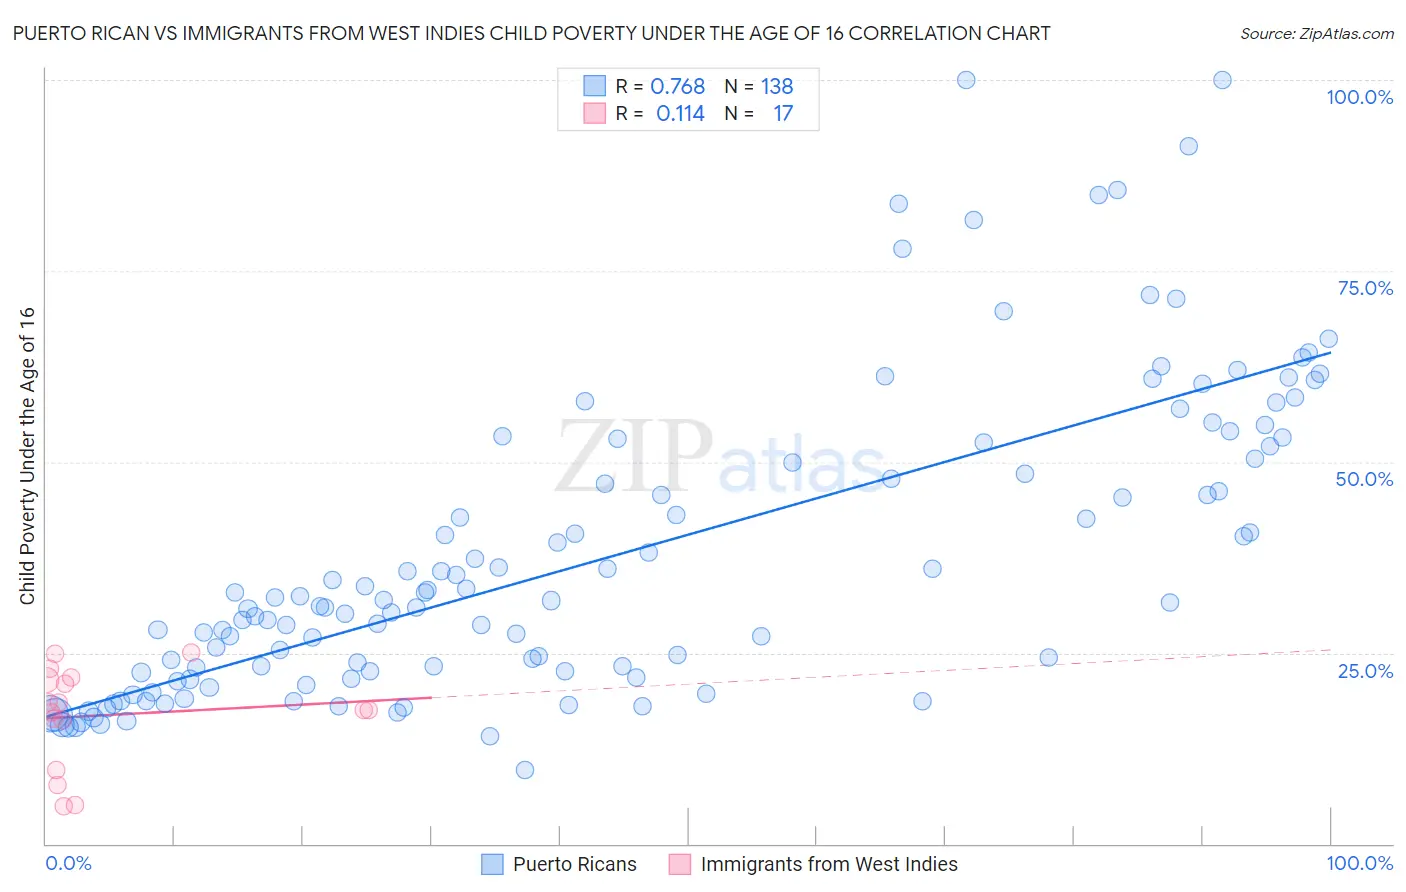 Puerto Rican vs Immigrants from West Indies Child Poverty Under the Age of 16